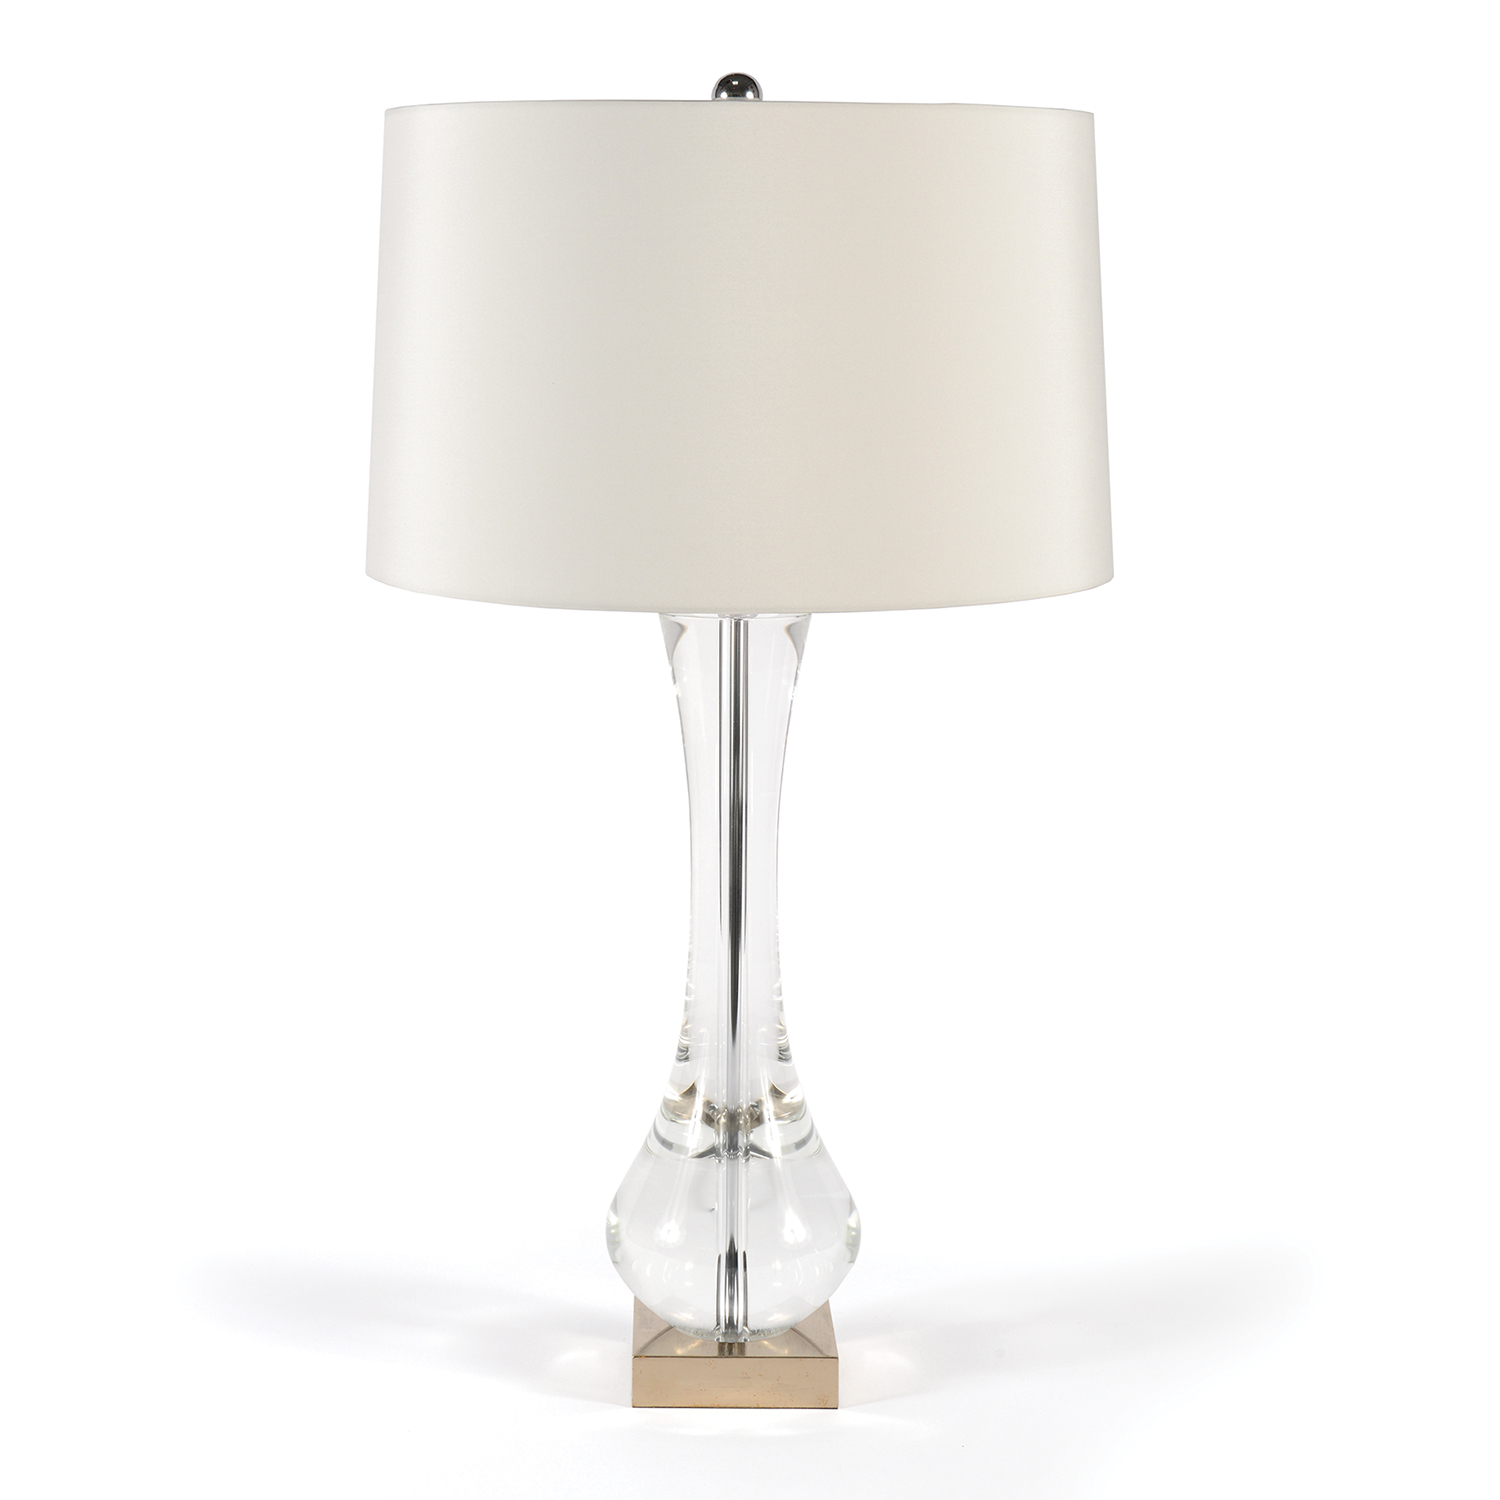 Allan KnightLighting | Lamps—Glass and Mineral Lamps | Bulb Glass ...